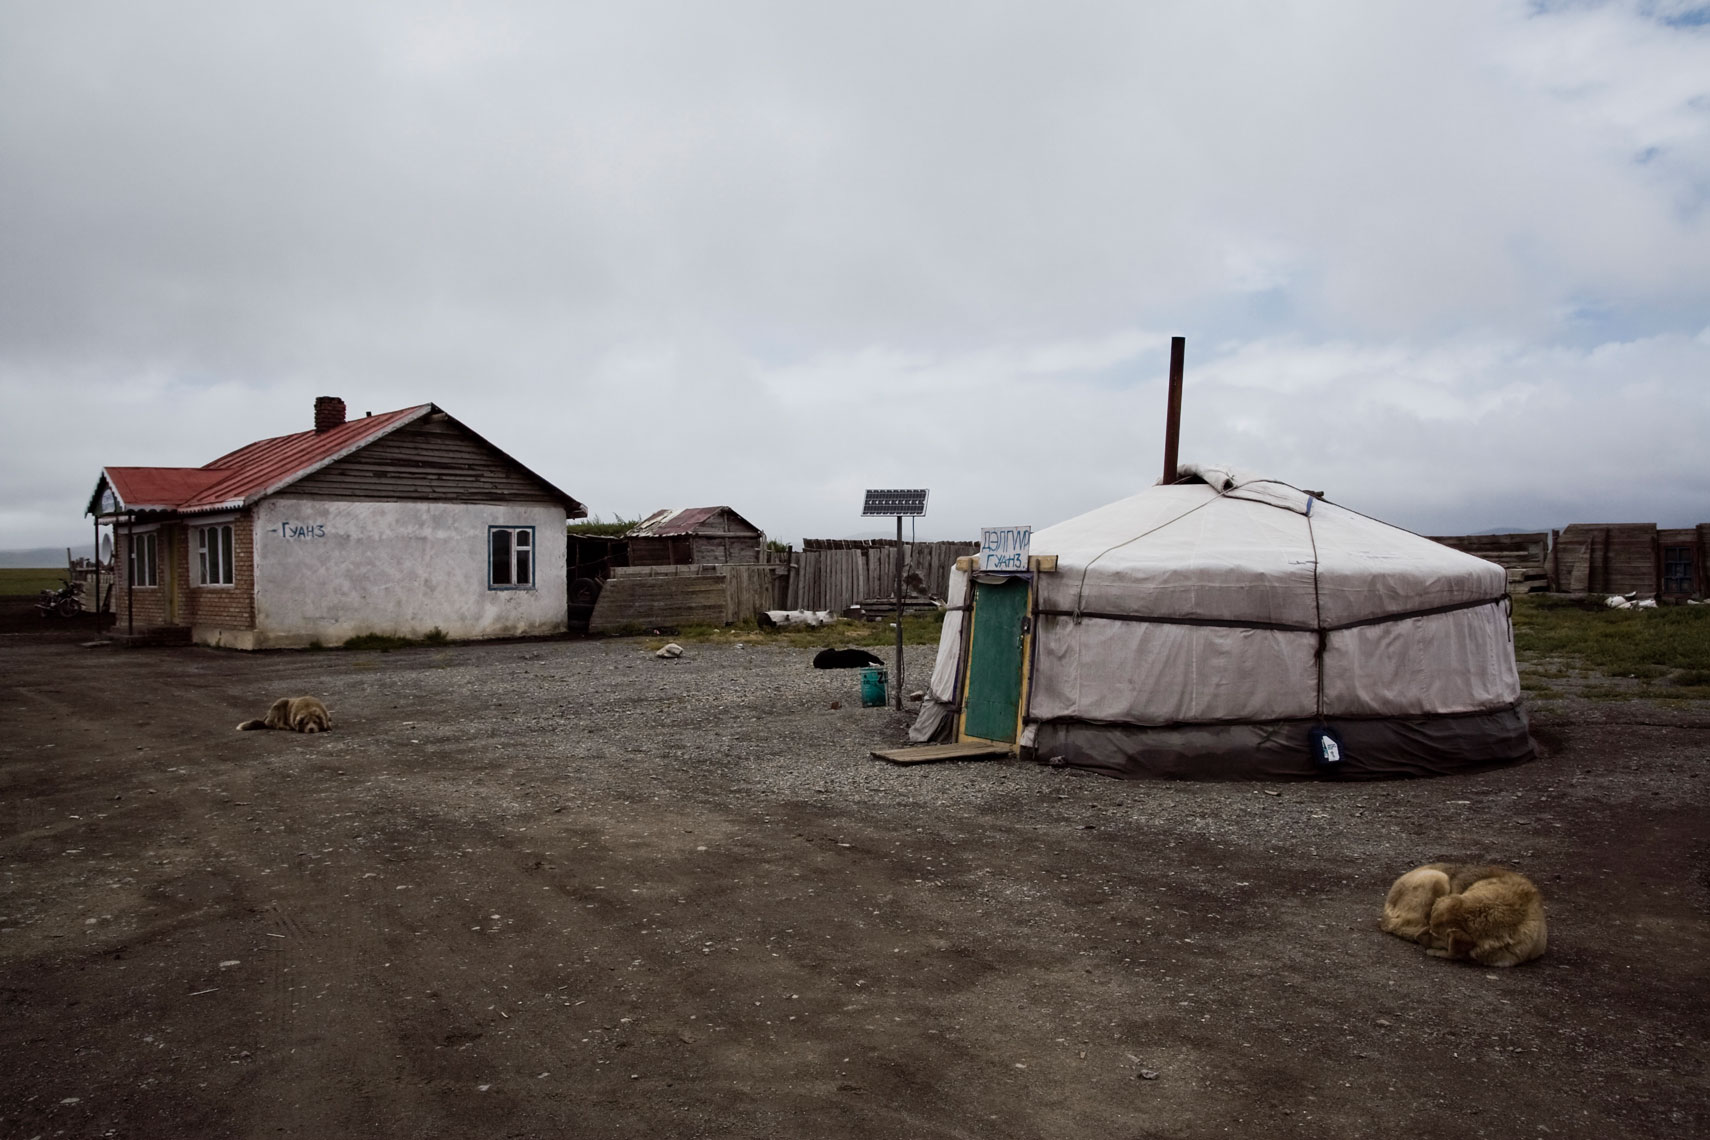 MONGOLIA, 2012. An outpost on the road to Ulan Bator.